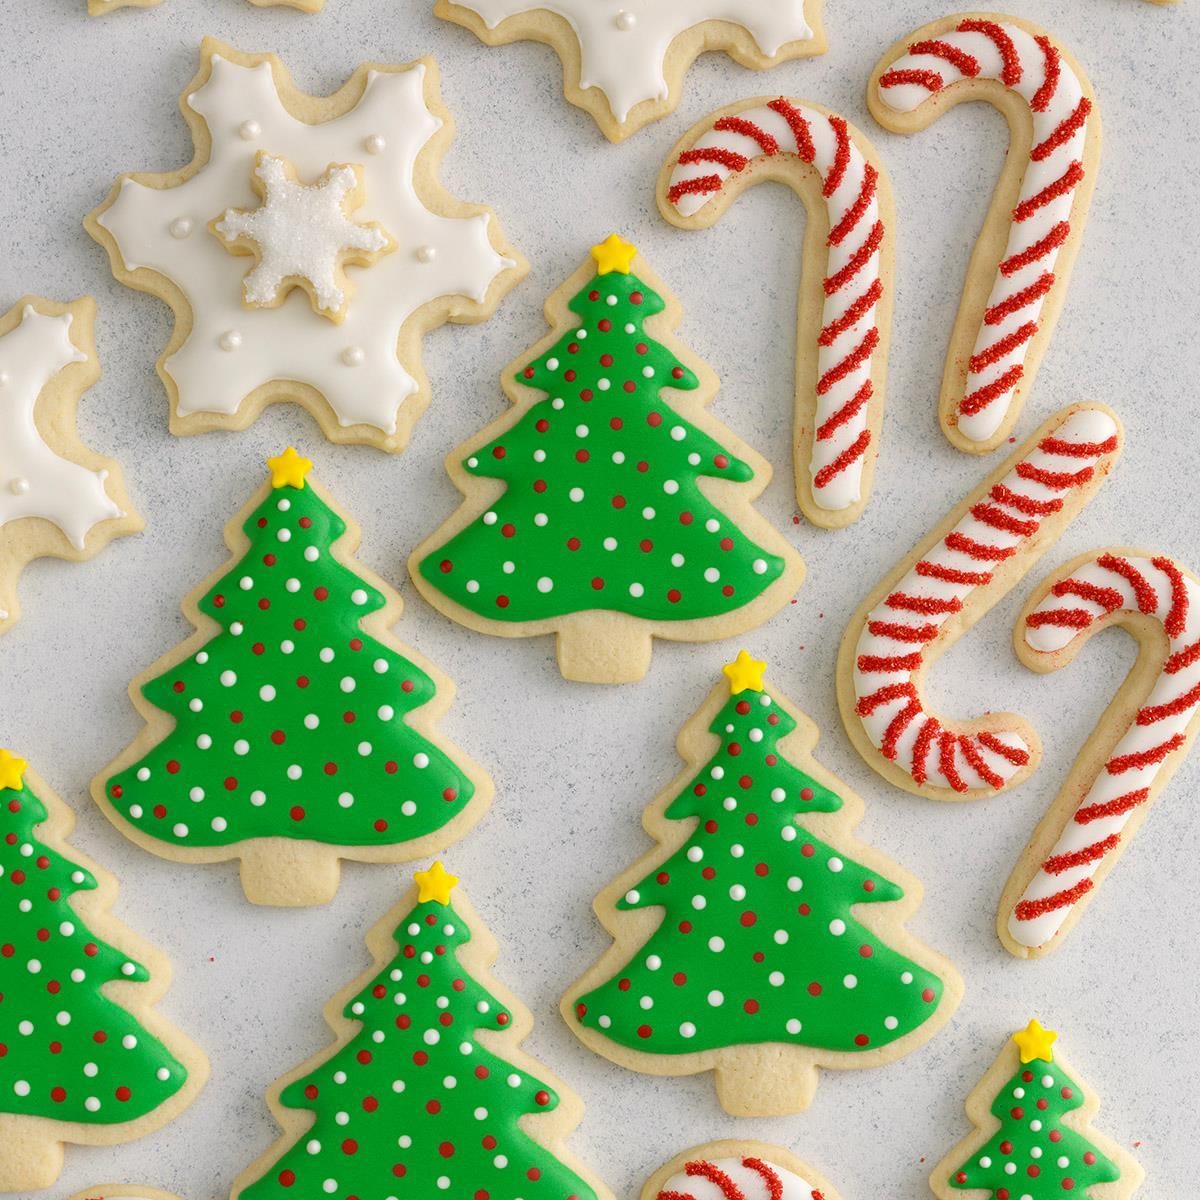 Decorated Christmas Cutout Cookies Recipe: How to Make It | Taste of Home